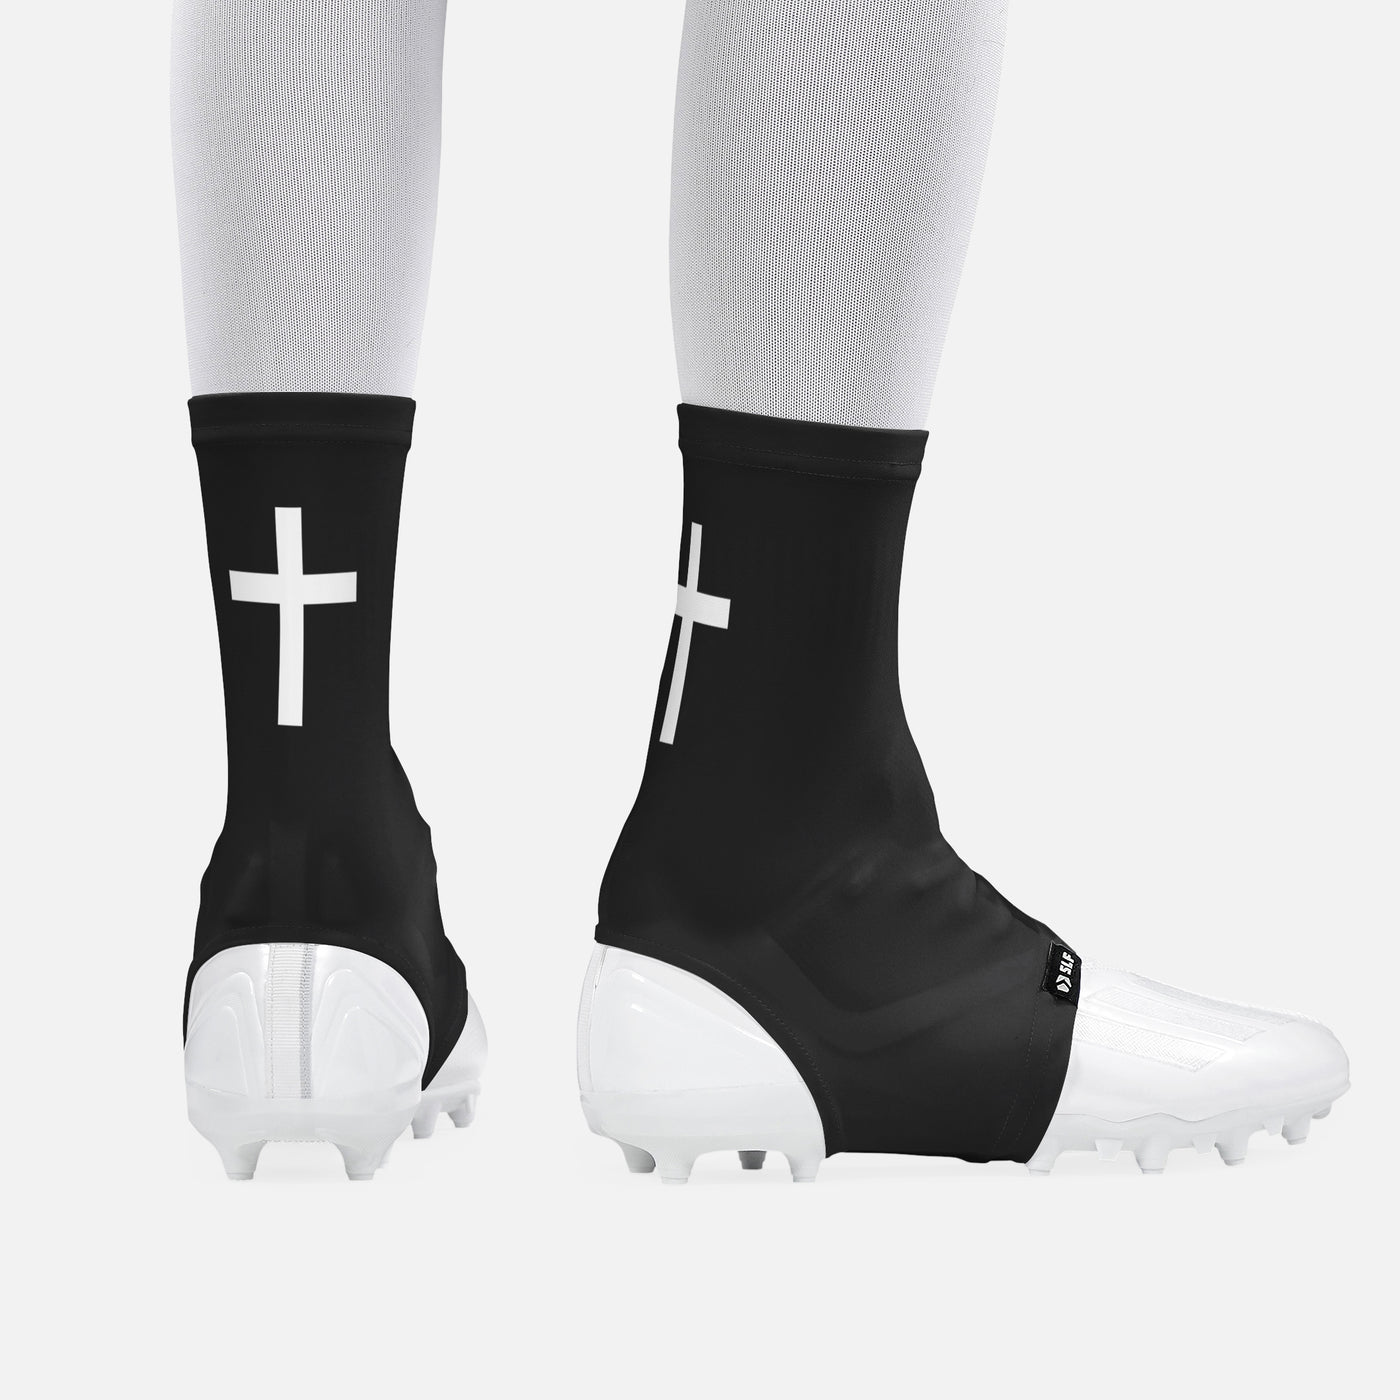 Faith Cross Black Spats / Cleat Covers